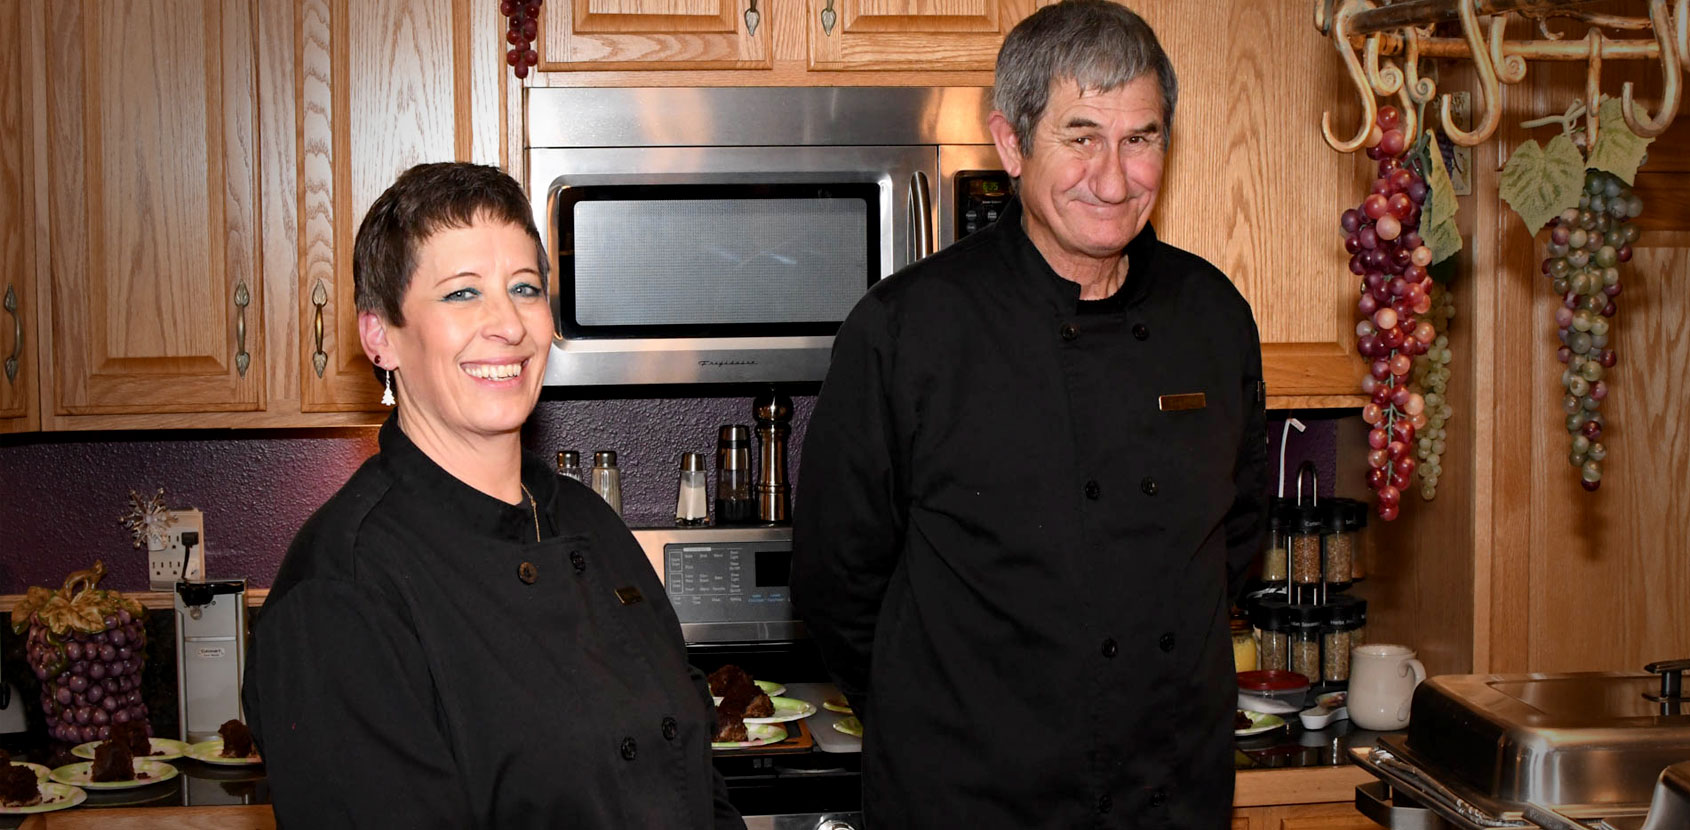 Old West Dutch Oven Catering Company owners Sheila and Tim Nold posing for camera in formal chef's attire